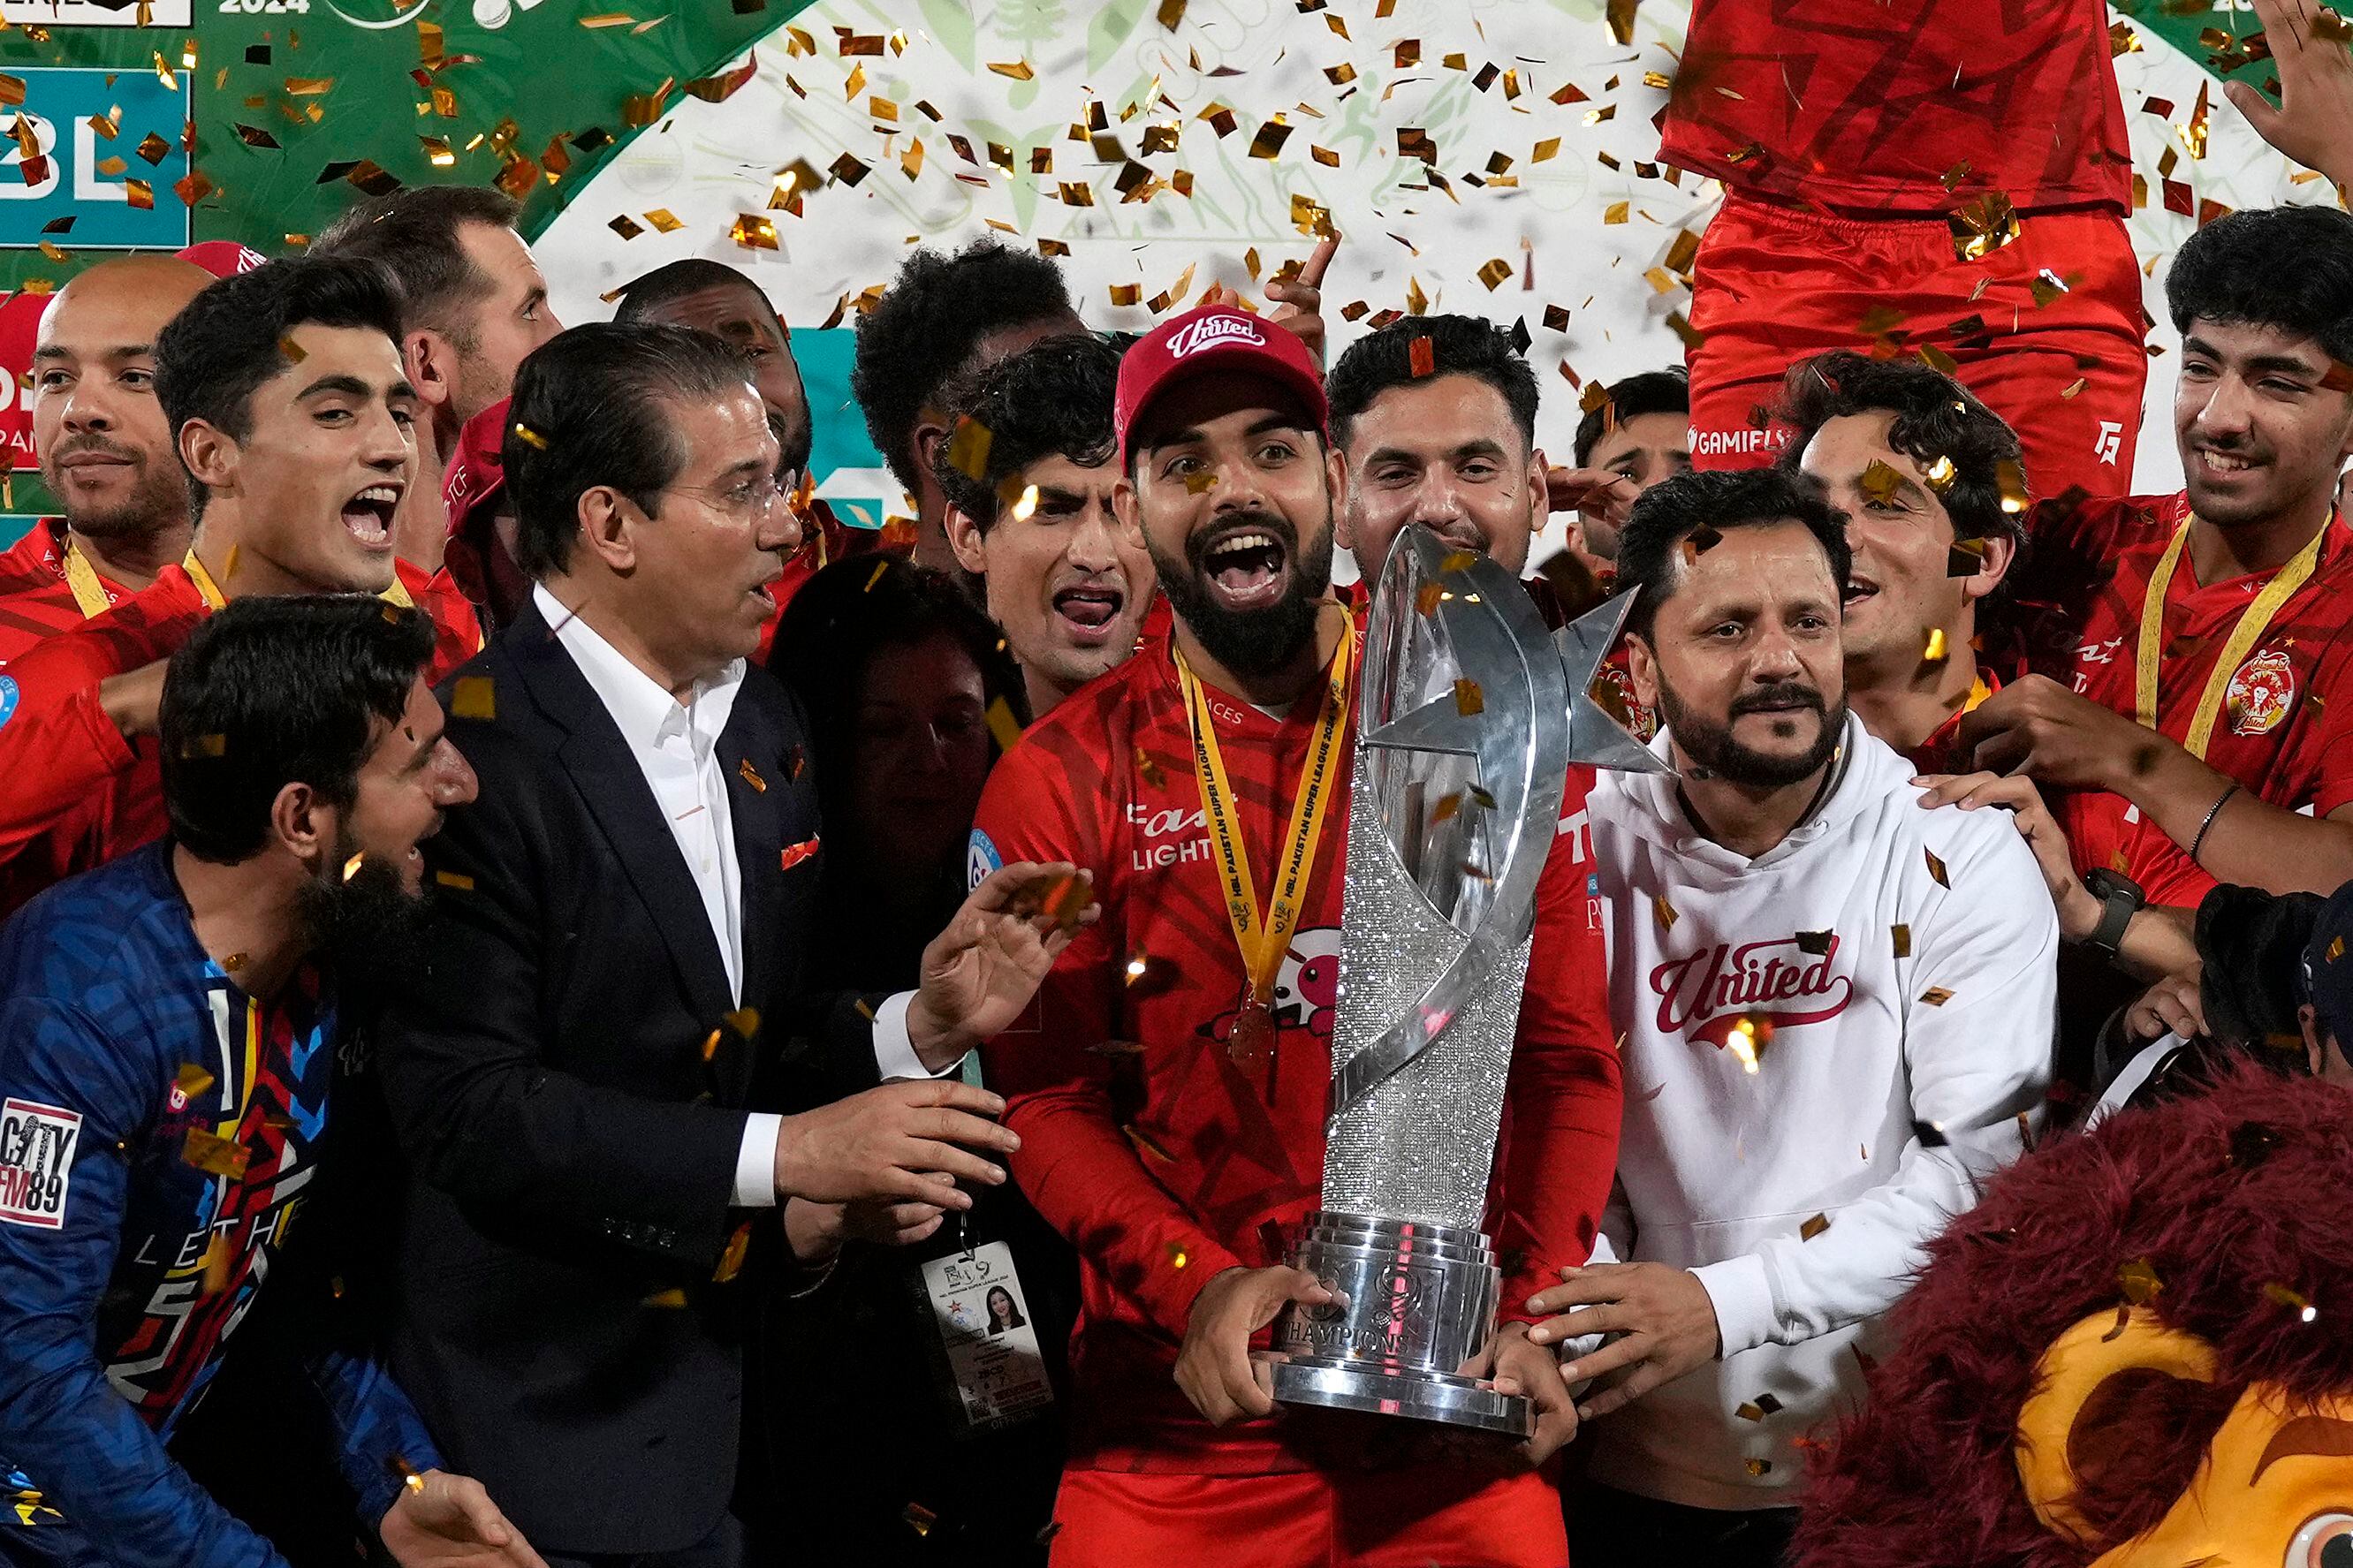 usman khan and muhammad waseem miss out on winners’ medals after epic psl finale